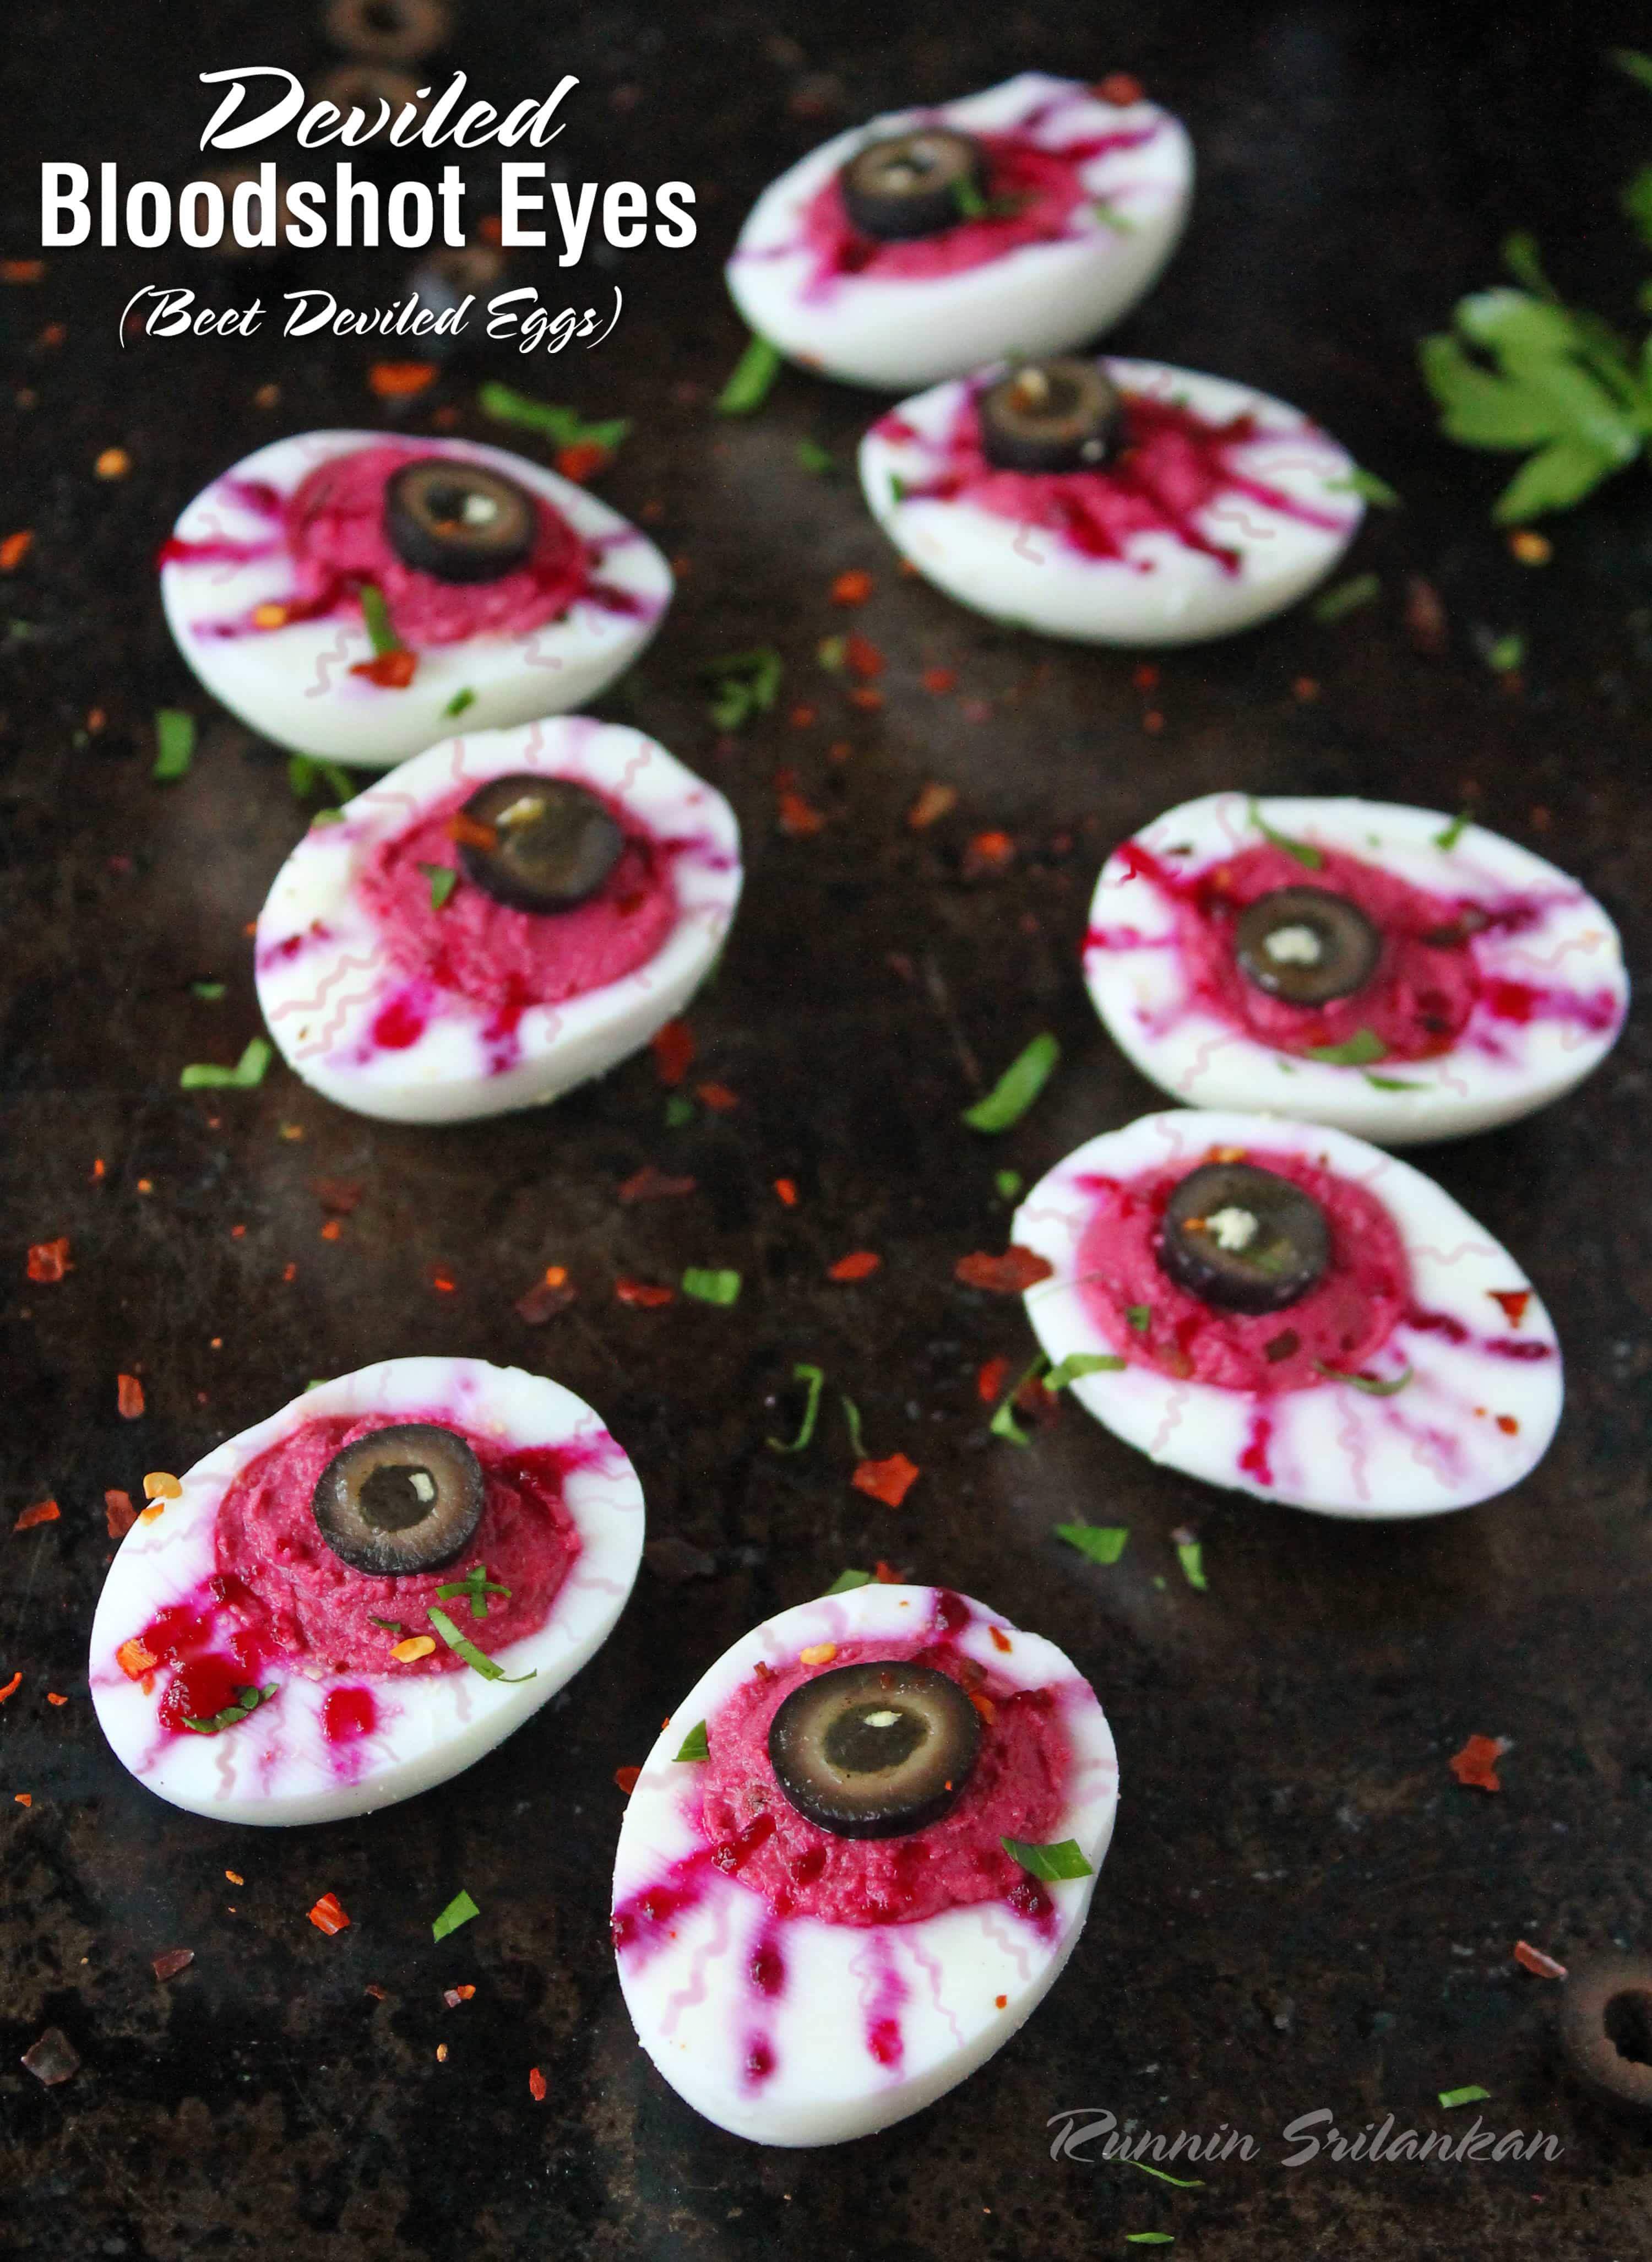 Deviled Egg Bloody Eyeballs - Deviled eggs loose the mayo and gain a bit of healthy in these bloody beety eyeballs!